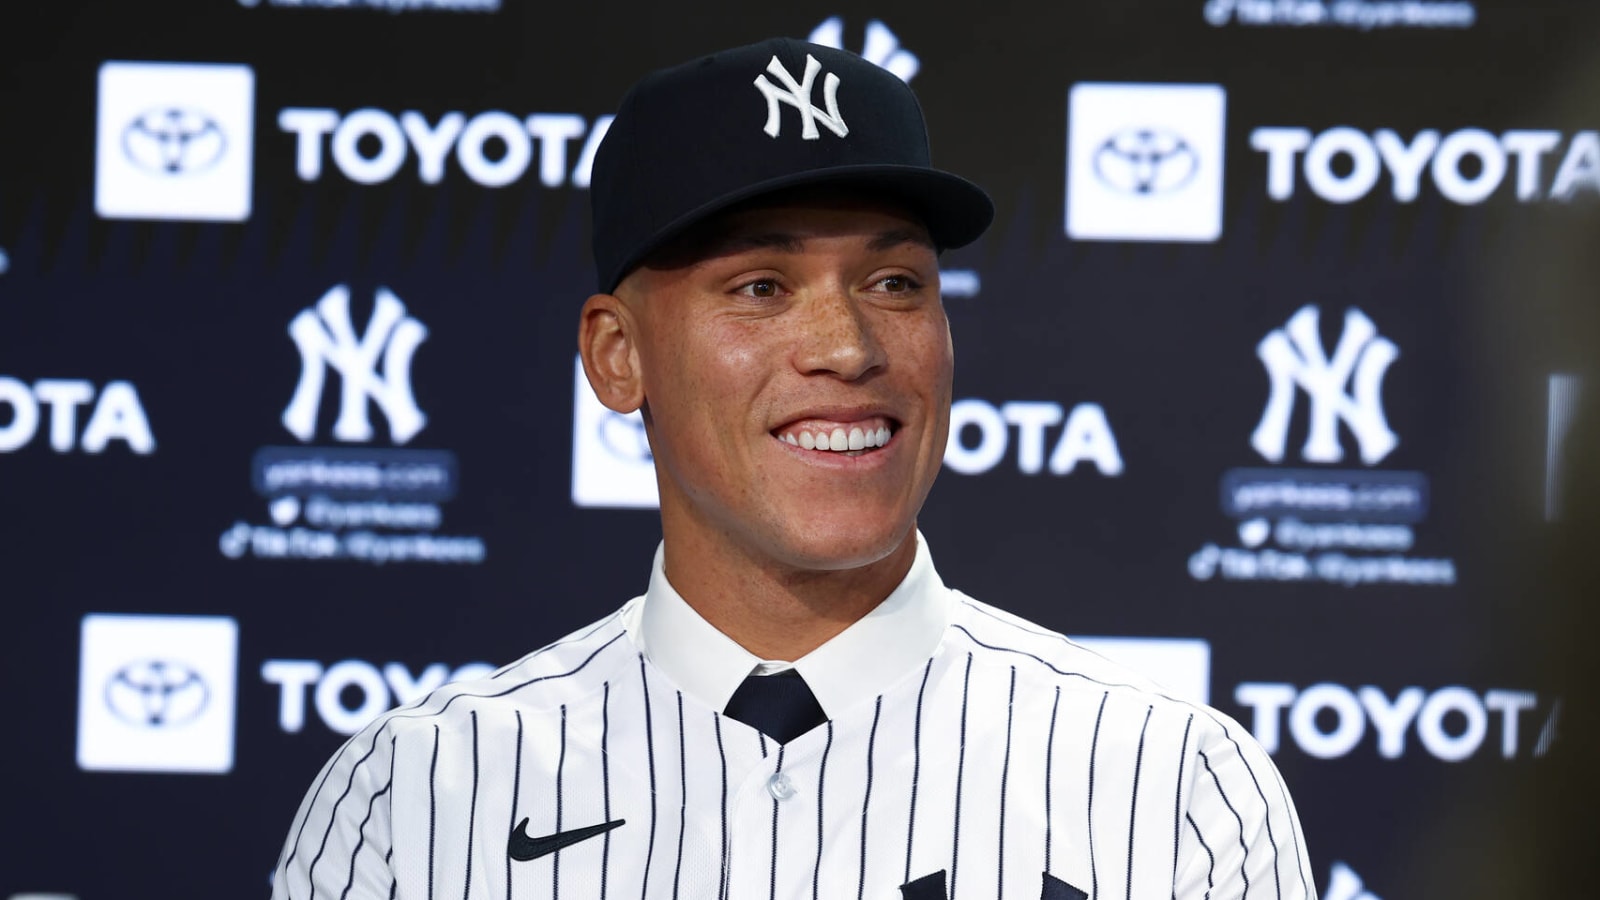 Yankees: Aaron Judge got his teeth fixed and looks completely different 